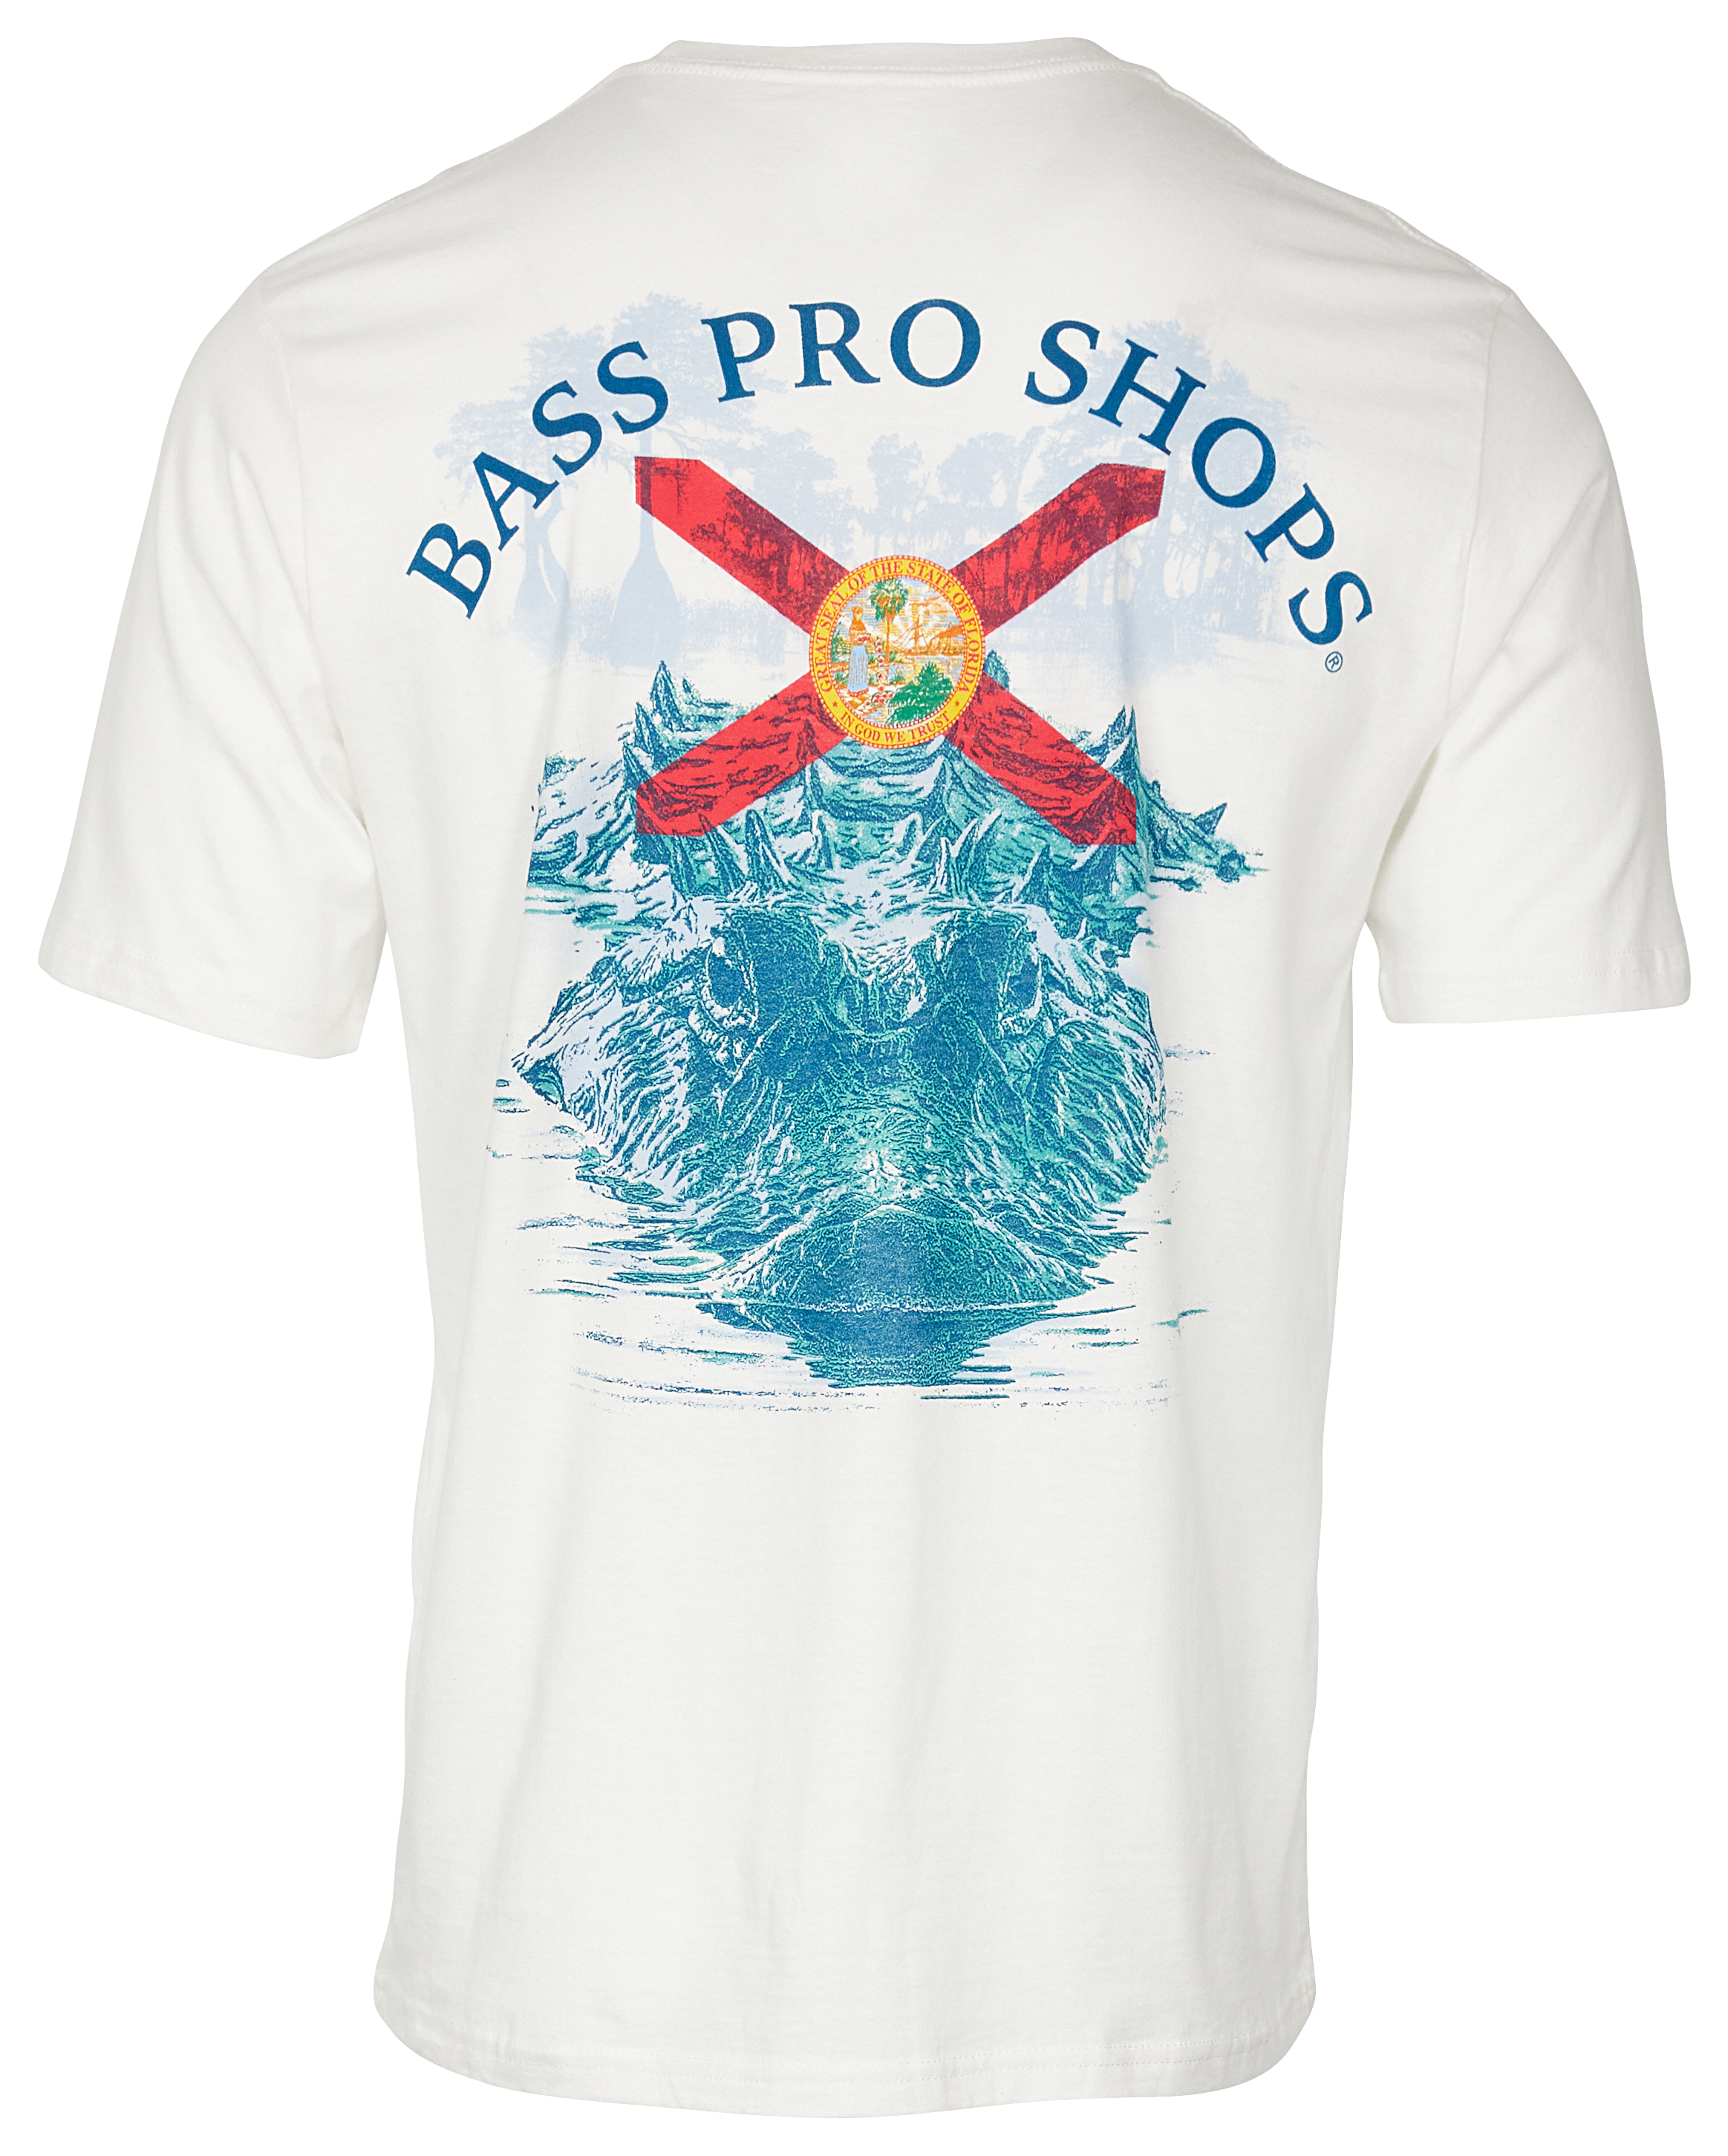 Bass Pro Shops Florida Shallow Waters Graphic Short-Sleeve T-Shirt for Men - White - 3XL